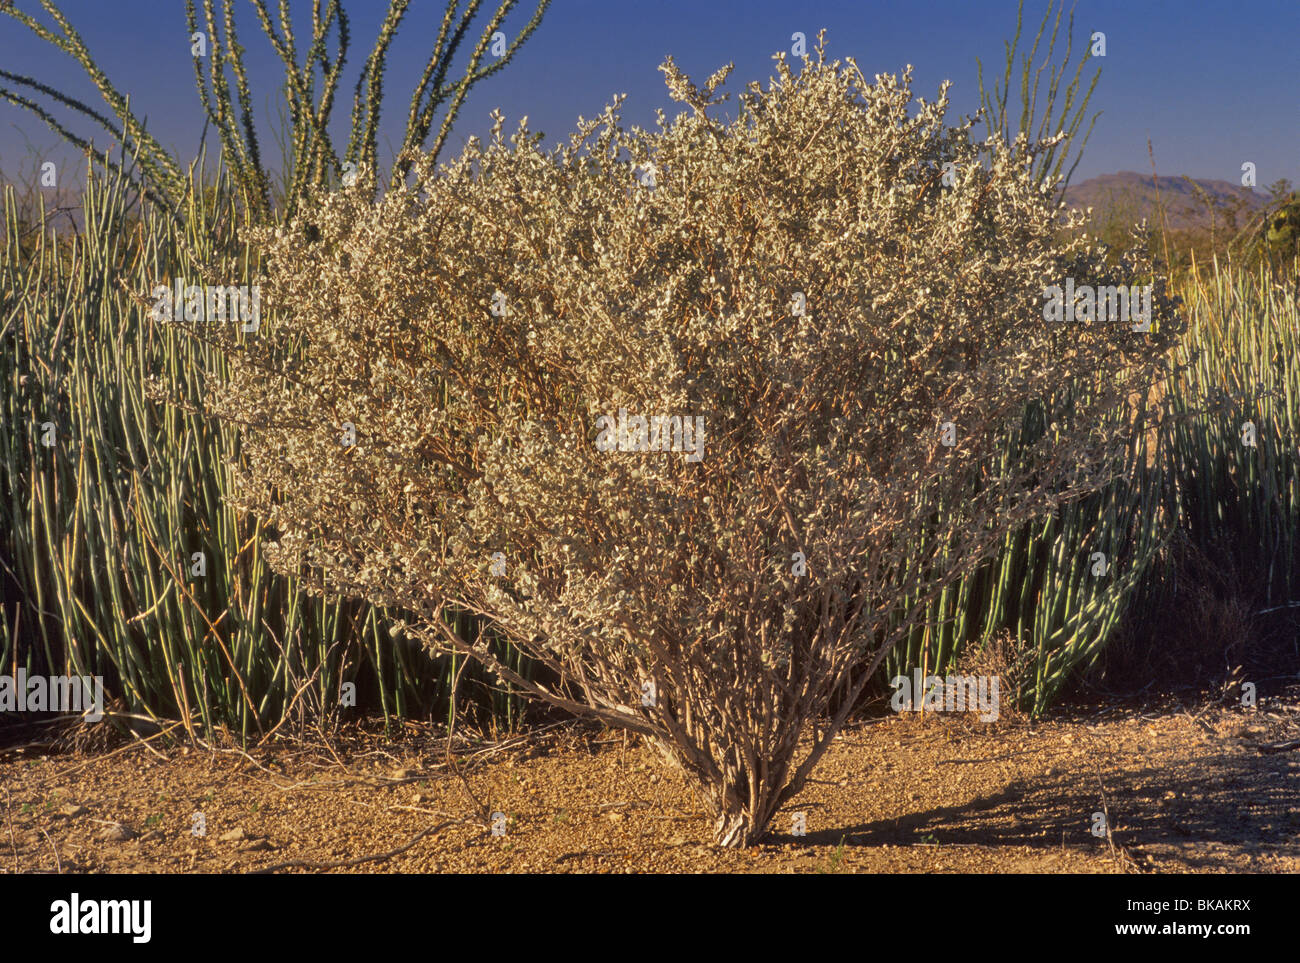 Texas sage with candelilla and ocotillos behind at Chihuahuan Desert near Old Ore Road in Big Bend National Park, Texas, USA Stock Photo